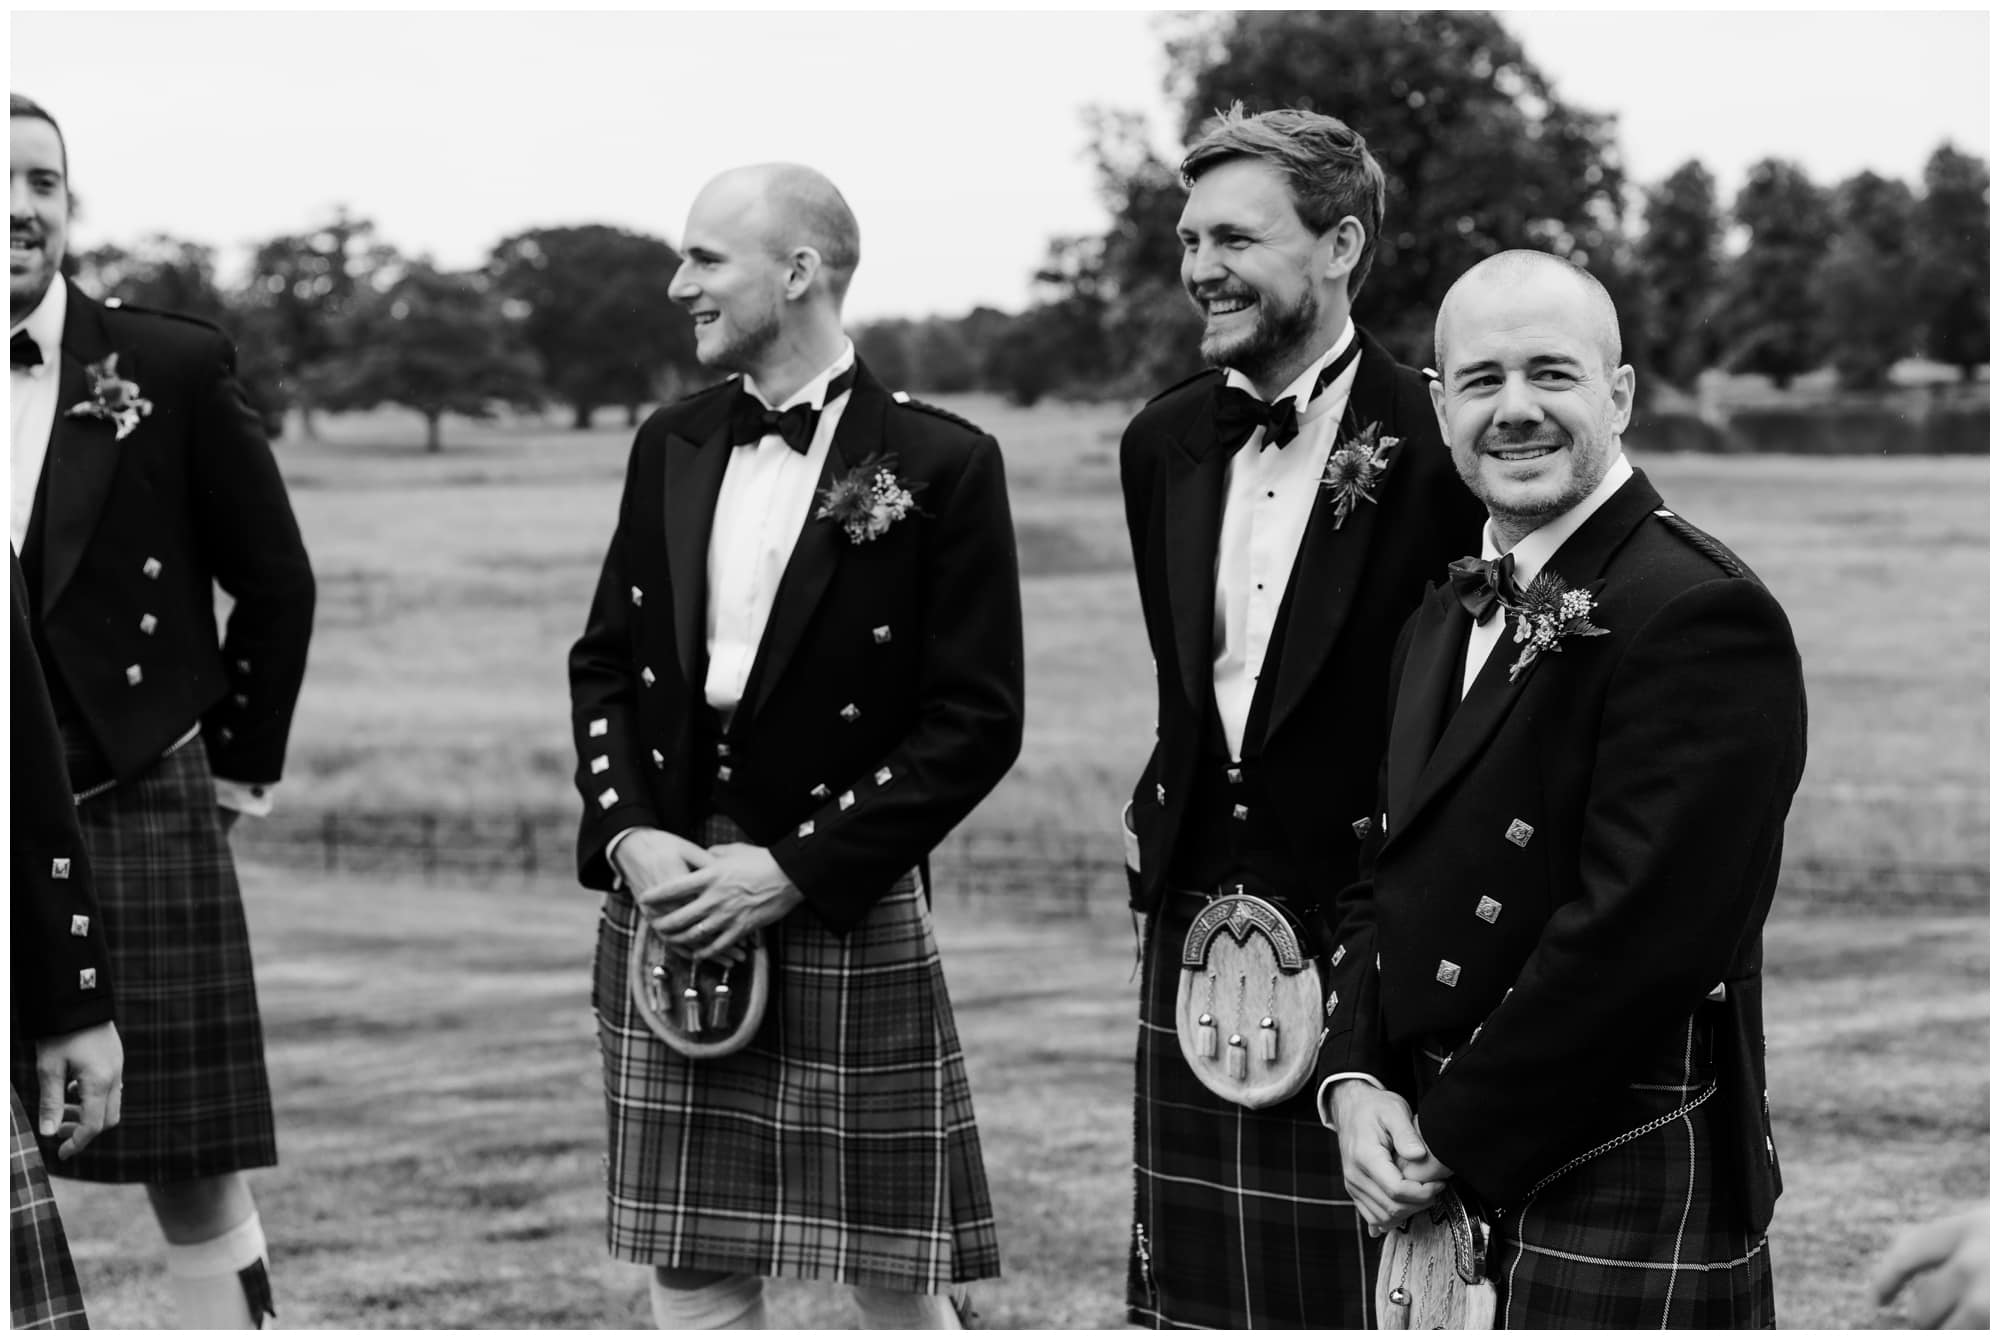 Groomsmen in Kilts waiting for the bride to arrive.